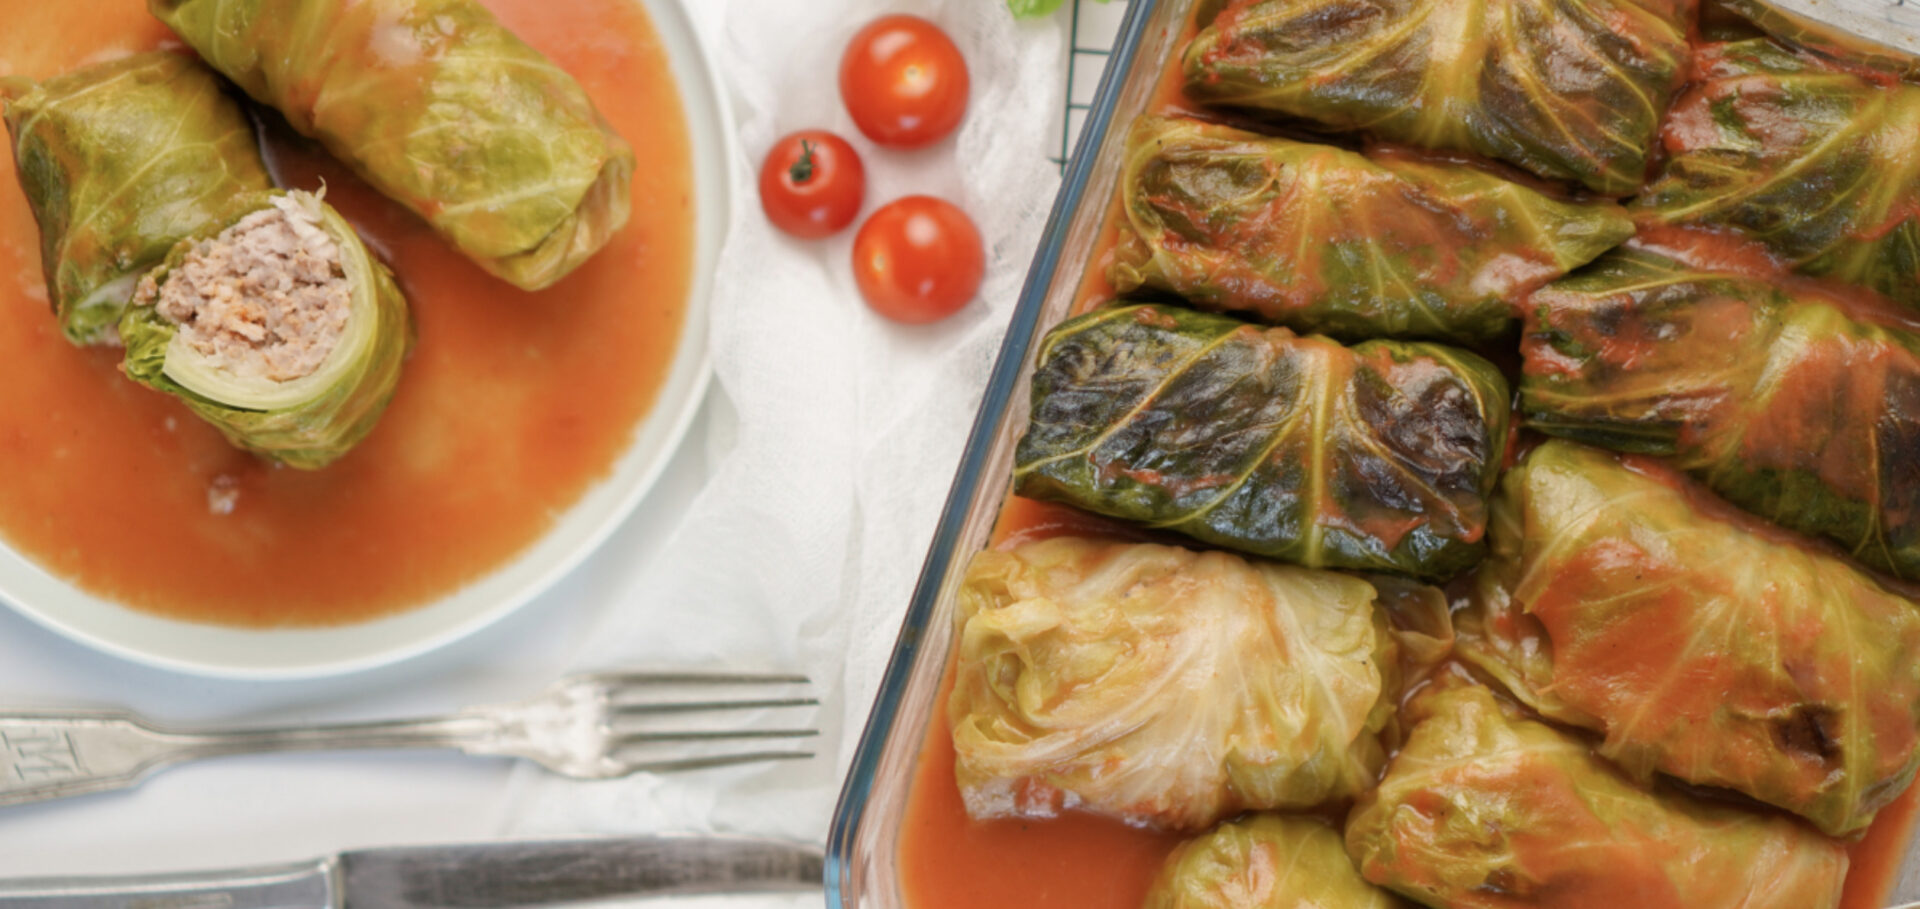 stuffed cabbage with tomatoes and onion in a large dish